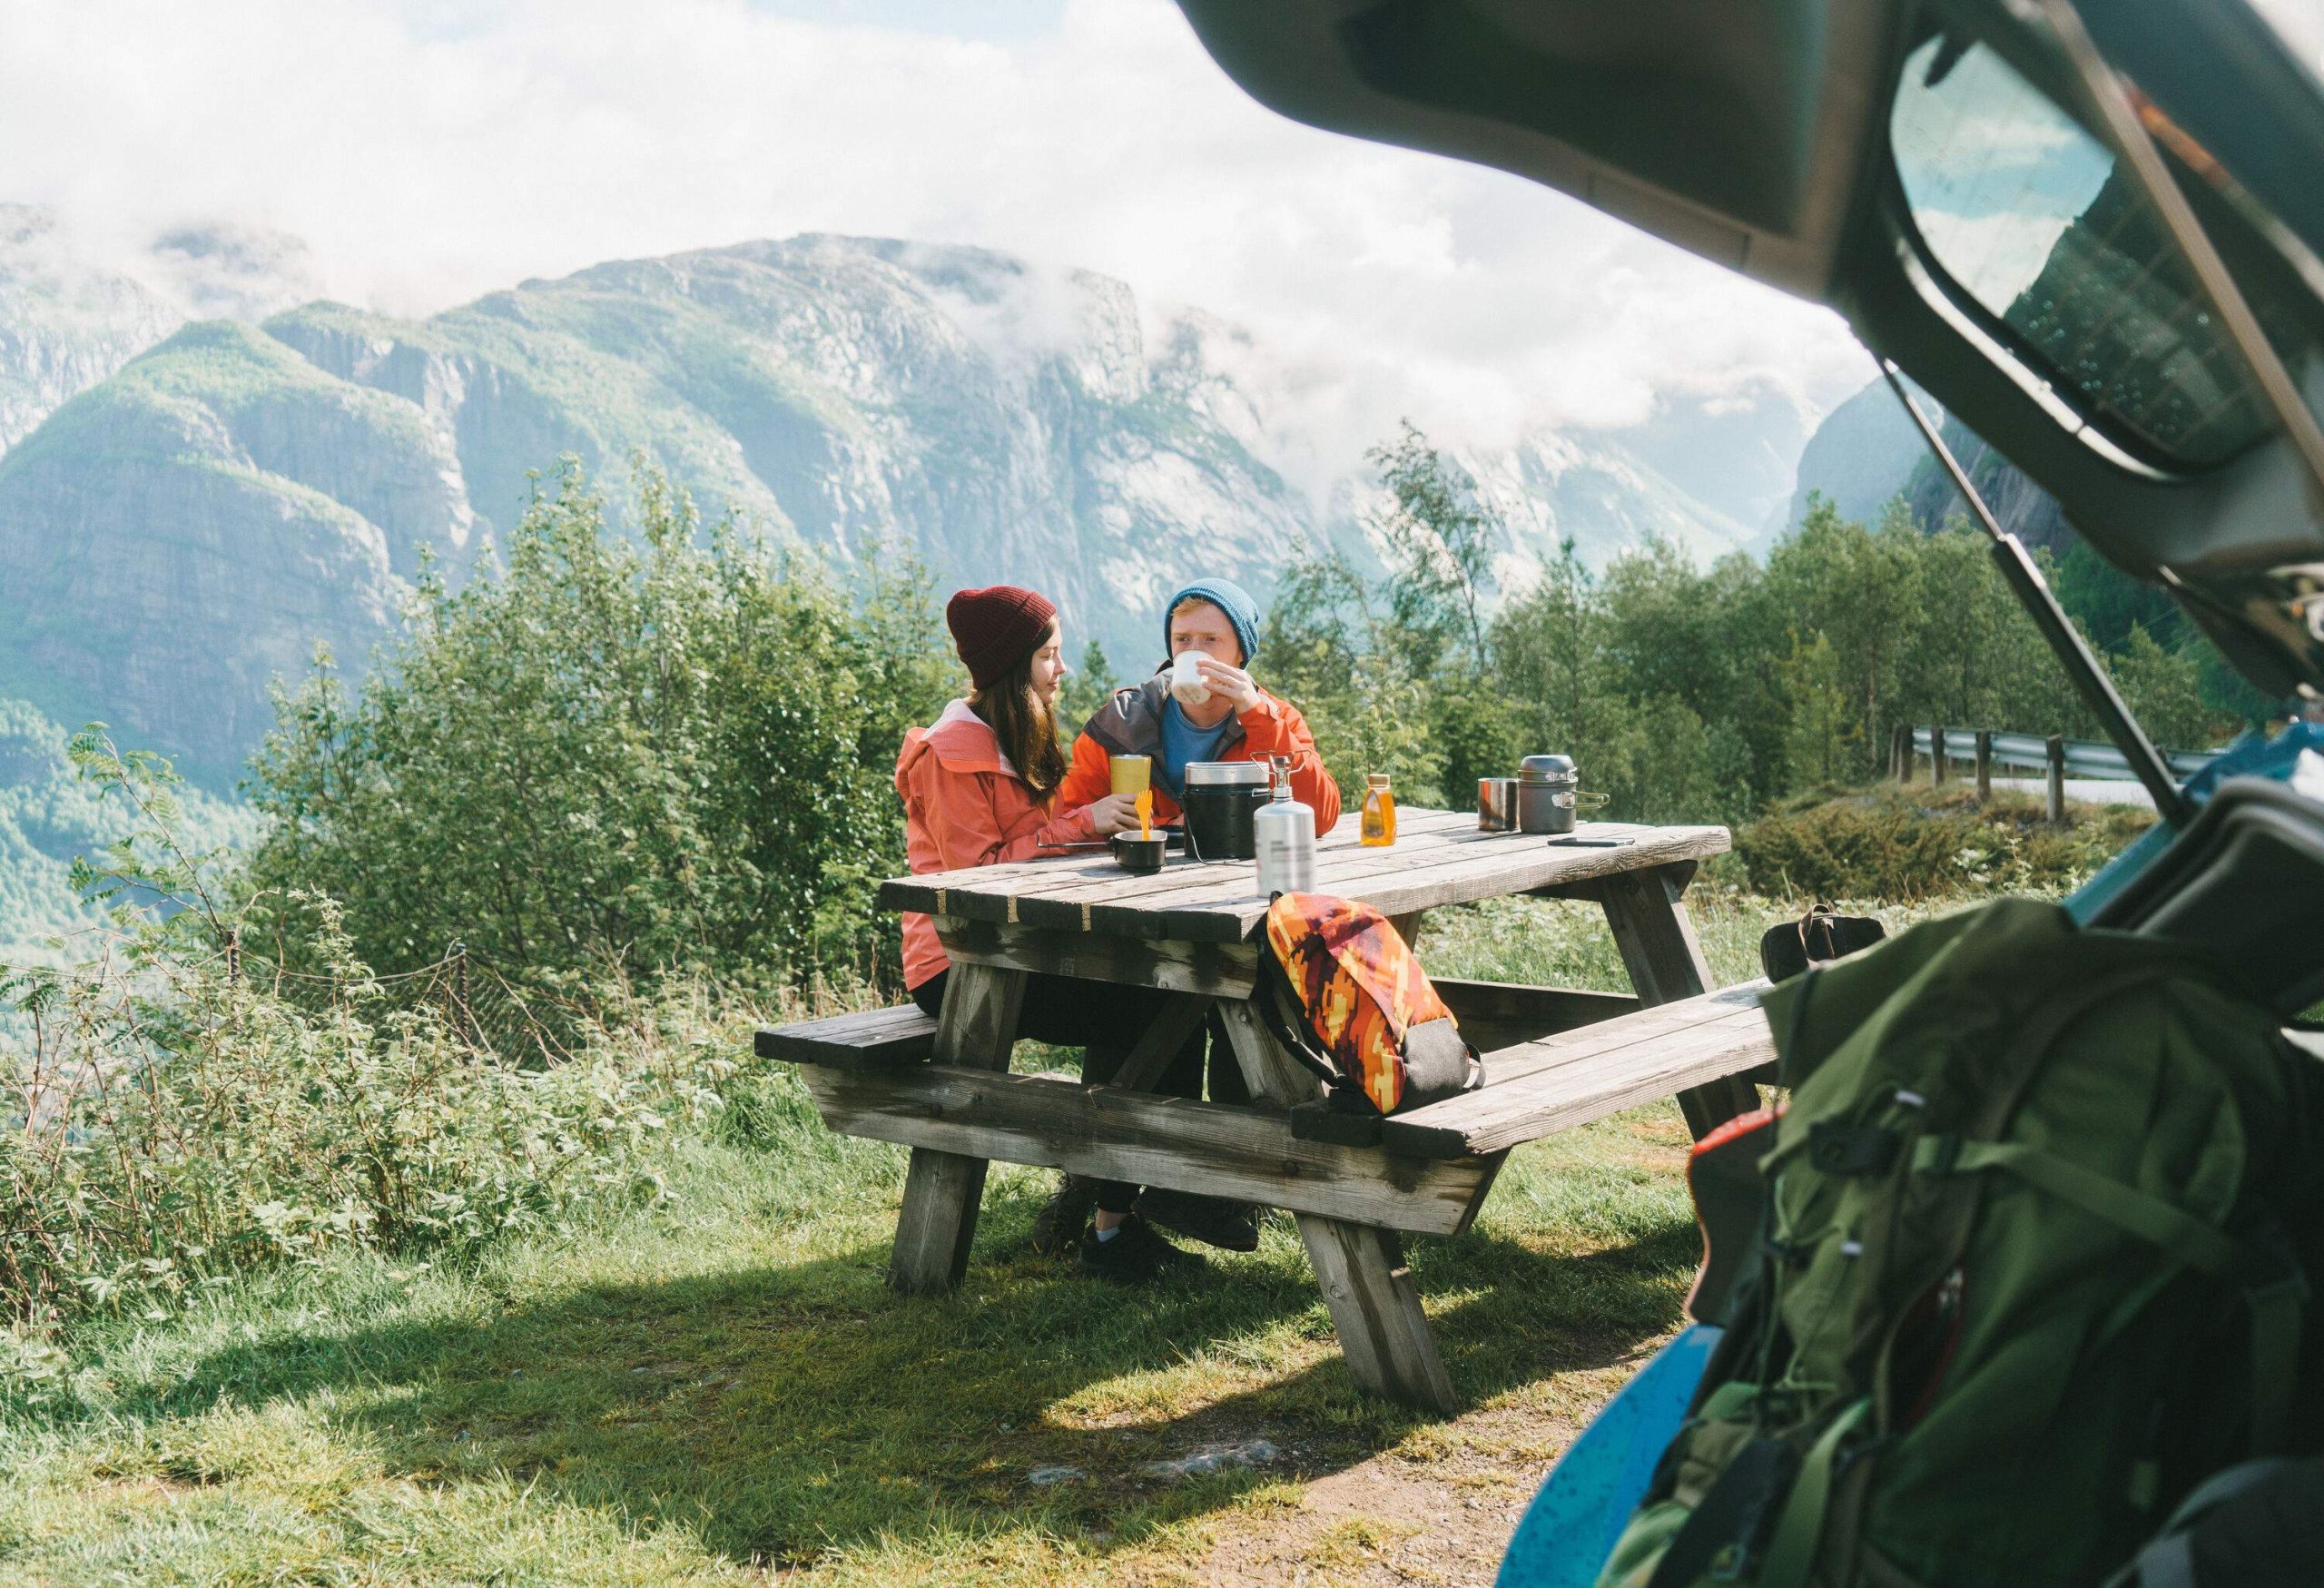 A couple in winter clothes having breakfast on a picnic table in a mountainous area.